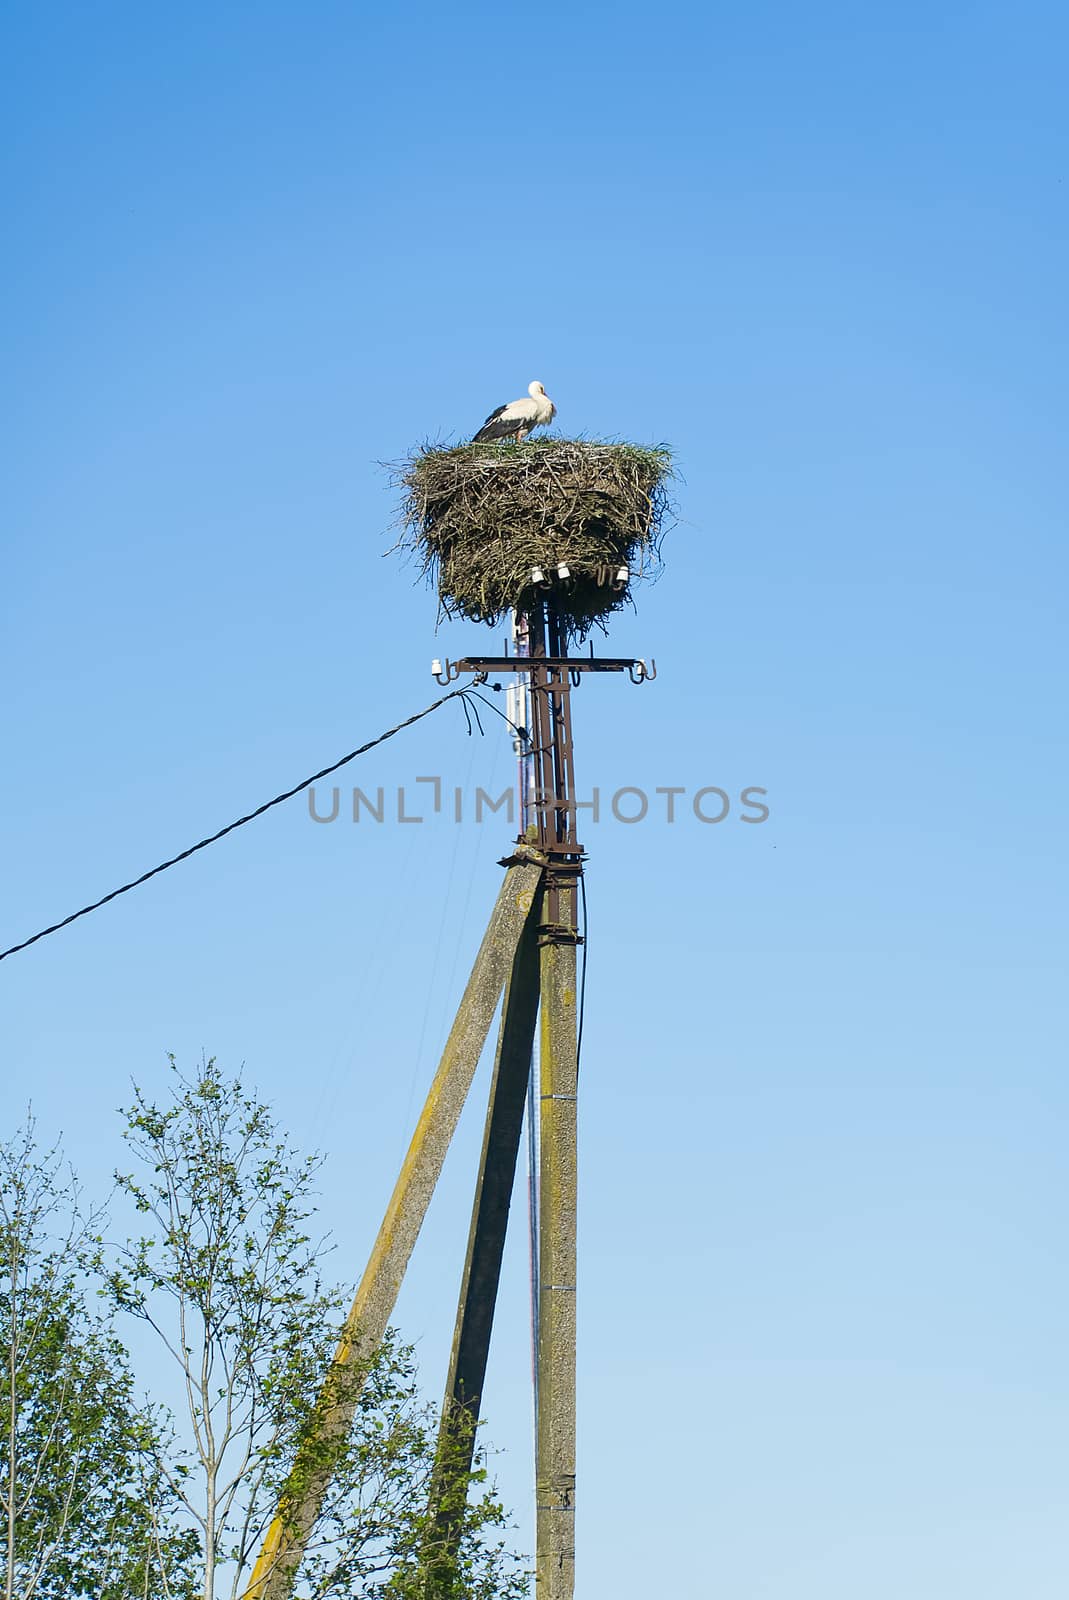 stork family nesting on the concrete pillar - separated on blue sky at background. stork nest on concrete electric pole. by PhotoTime